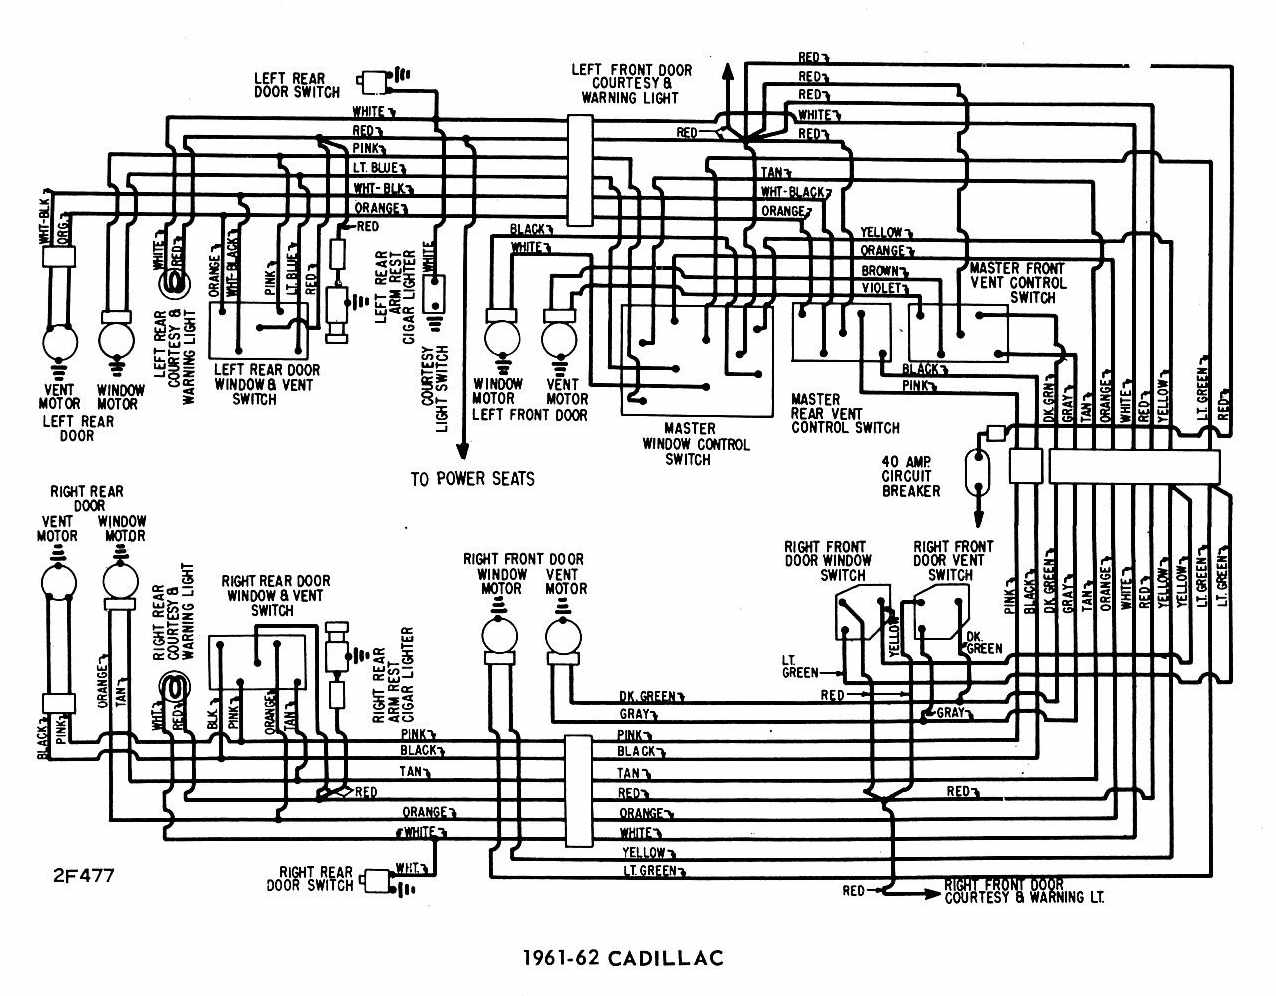 1999 Cadillac Deville Fuel Pump Wiring Diagram from www.automotive-manuals.net